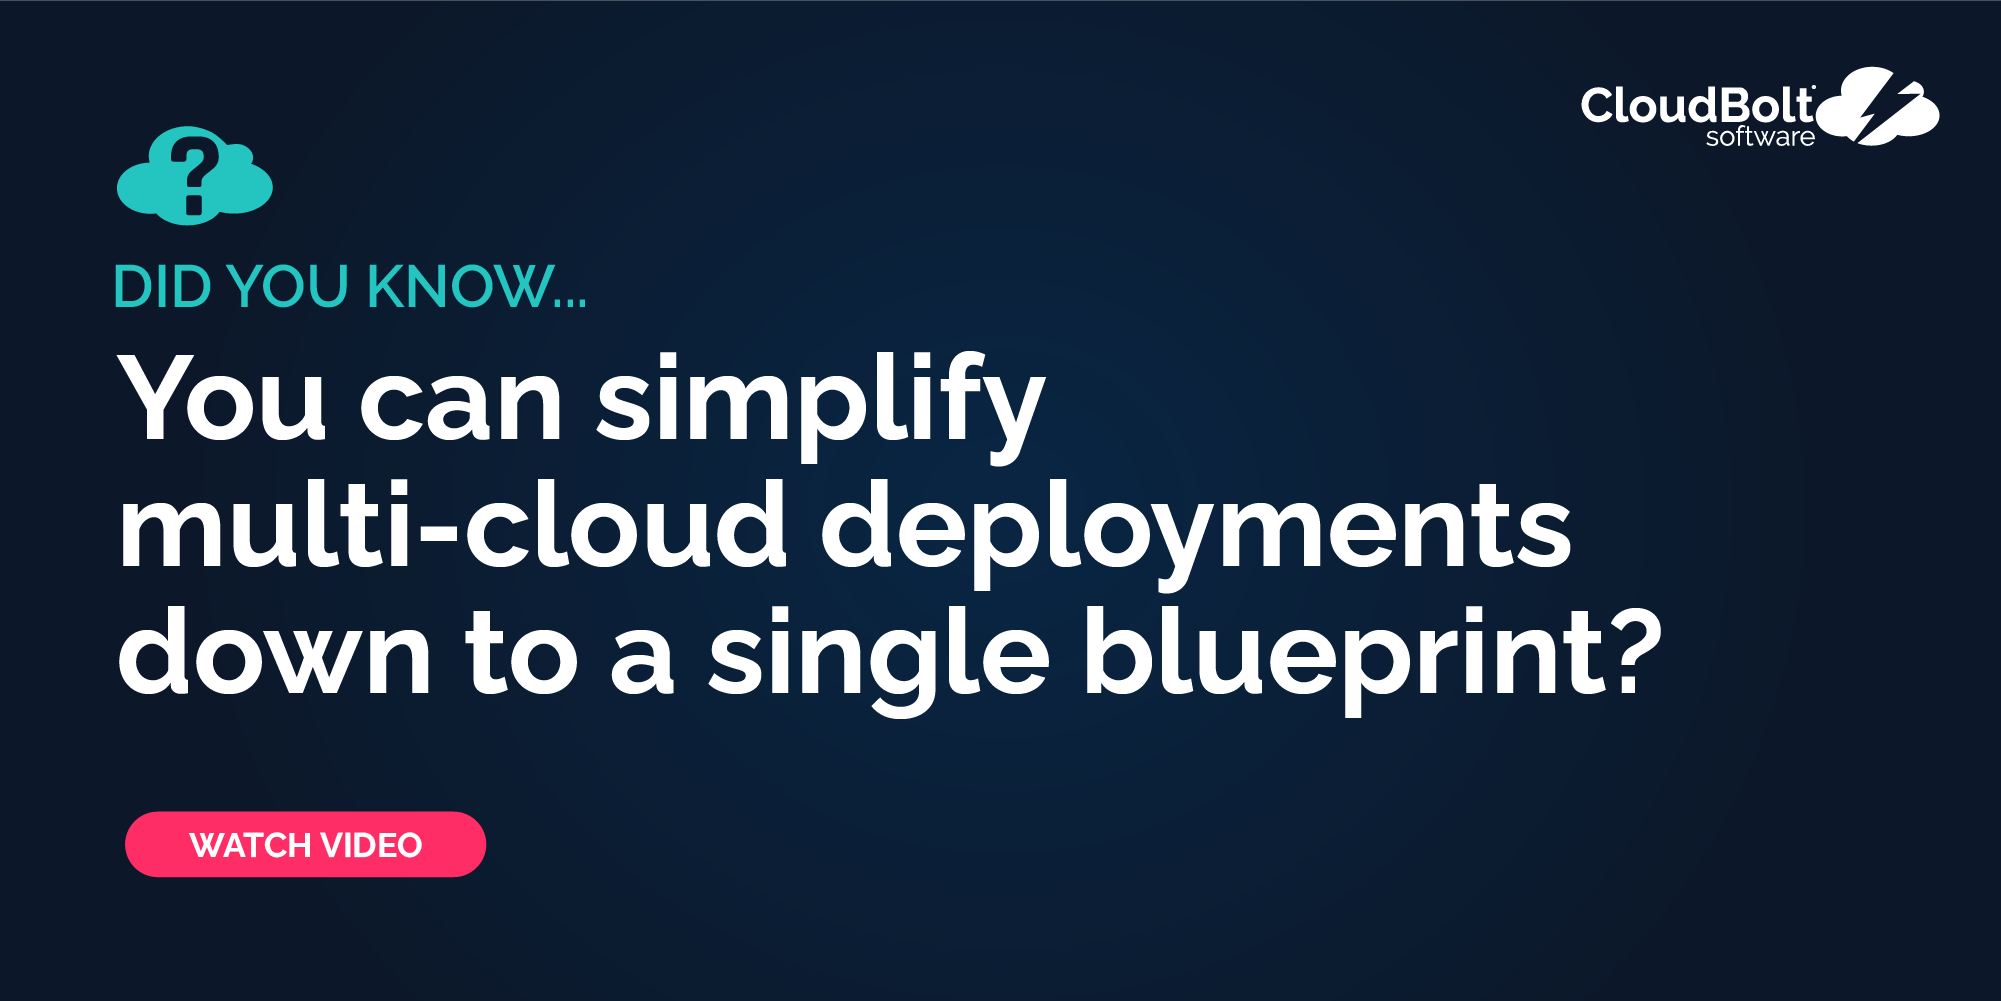 Did You Know... you can simplify multi-cloud deployments?